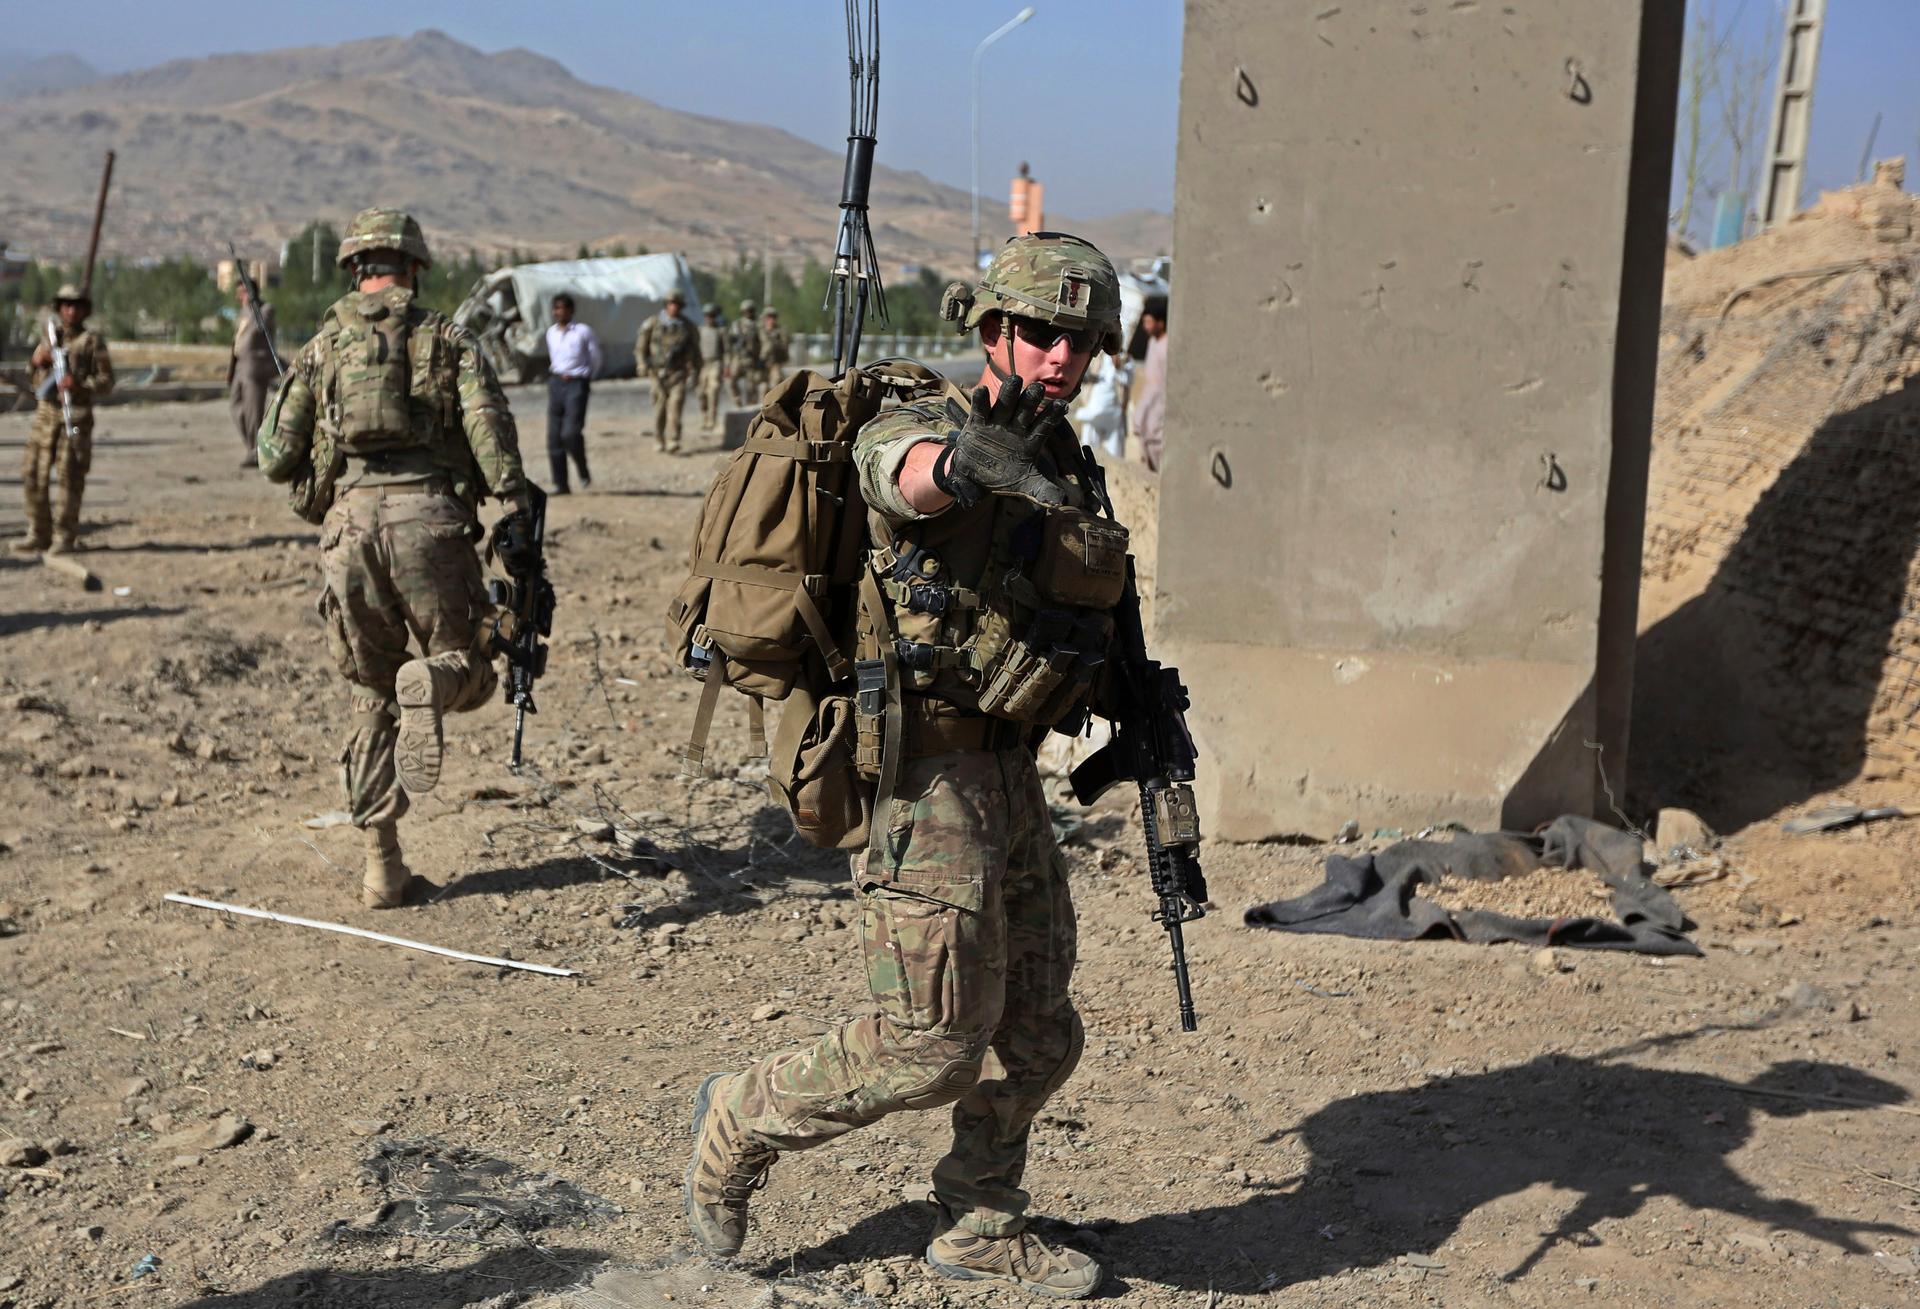 U.S. troops arrive at the site of a suicide attack in Maidan Shar, the capital of Wardak province in Afghanistan, on September 8, 2013. 